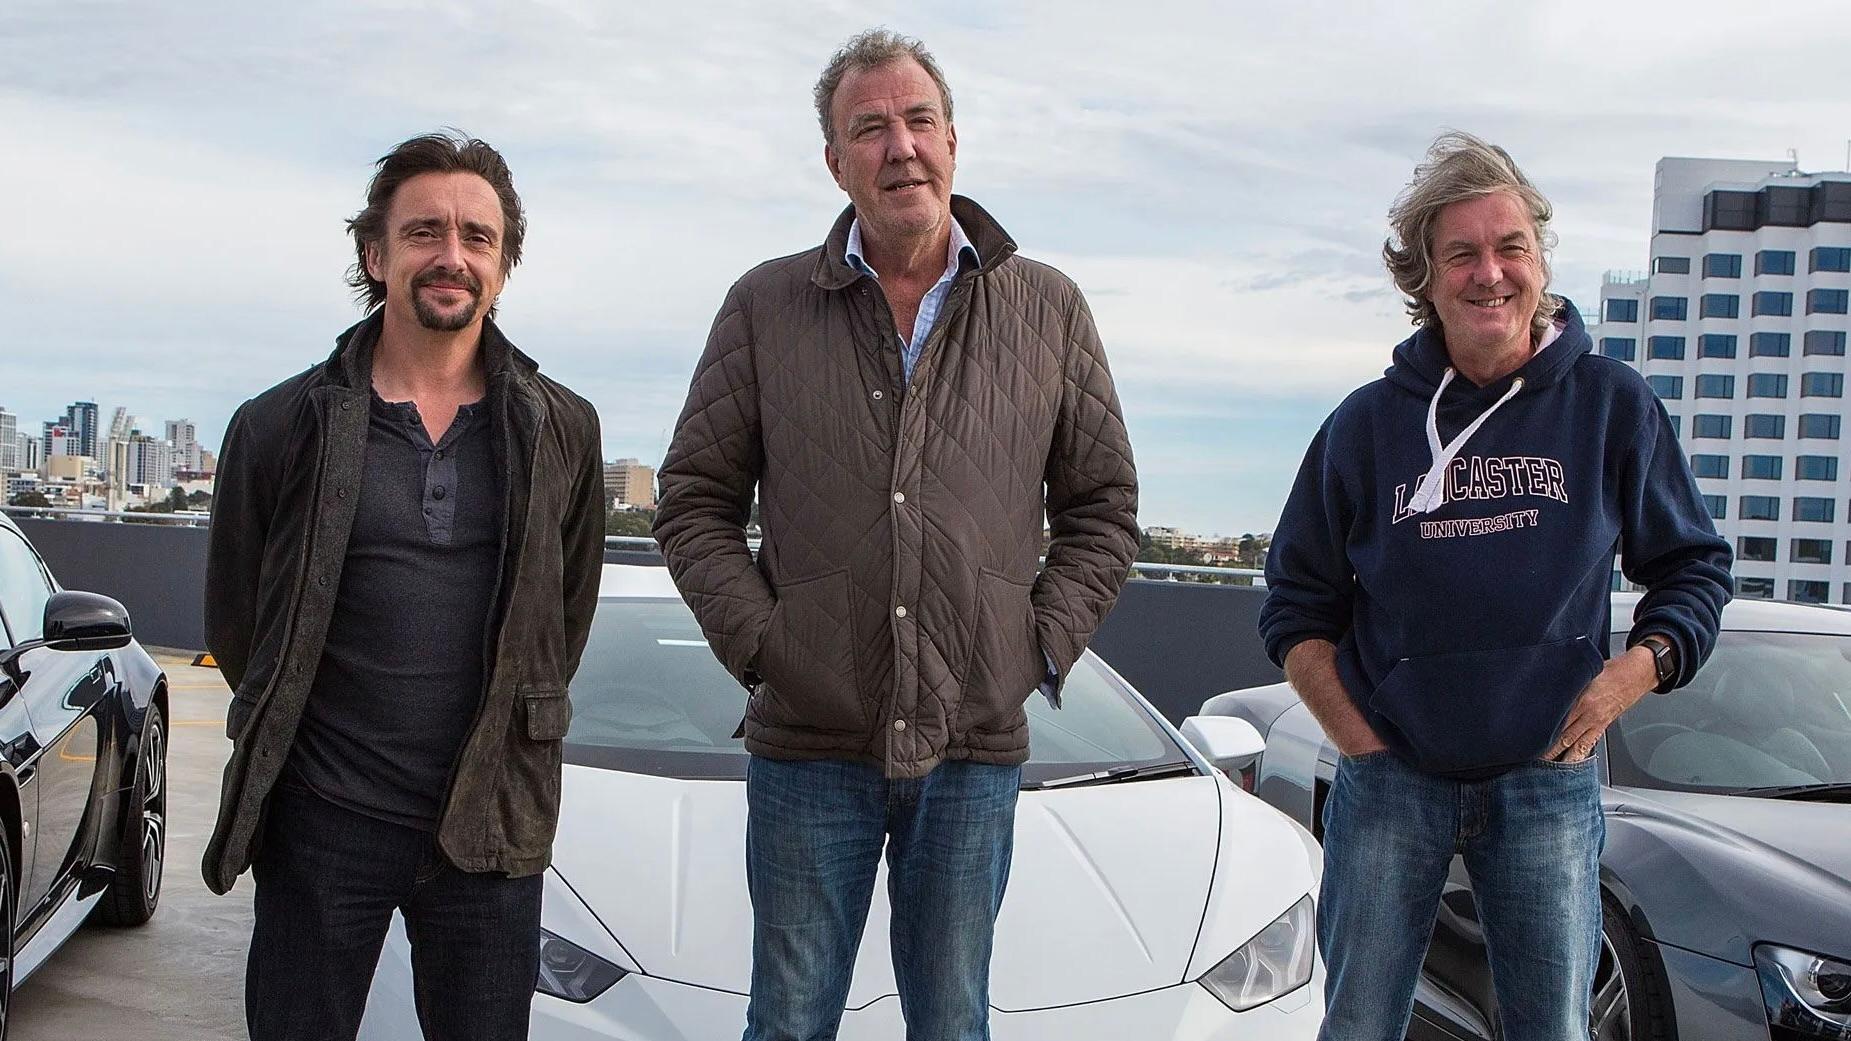 Jeremy Clarkson presenting The Grand Tour.